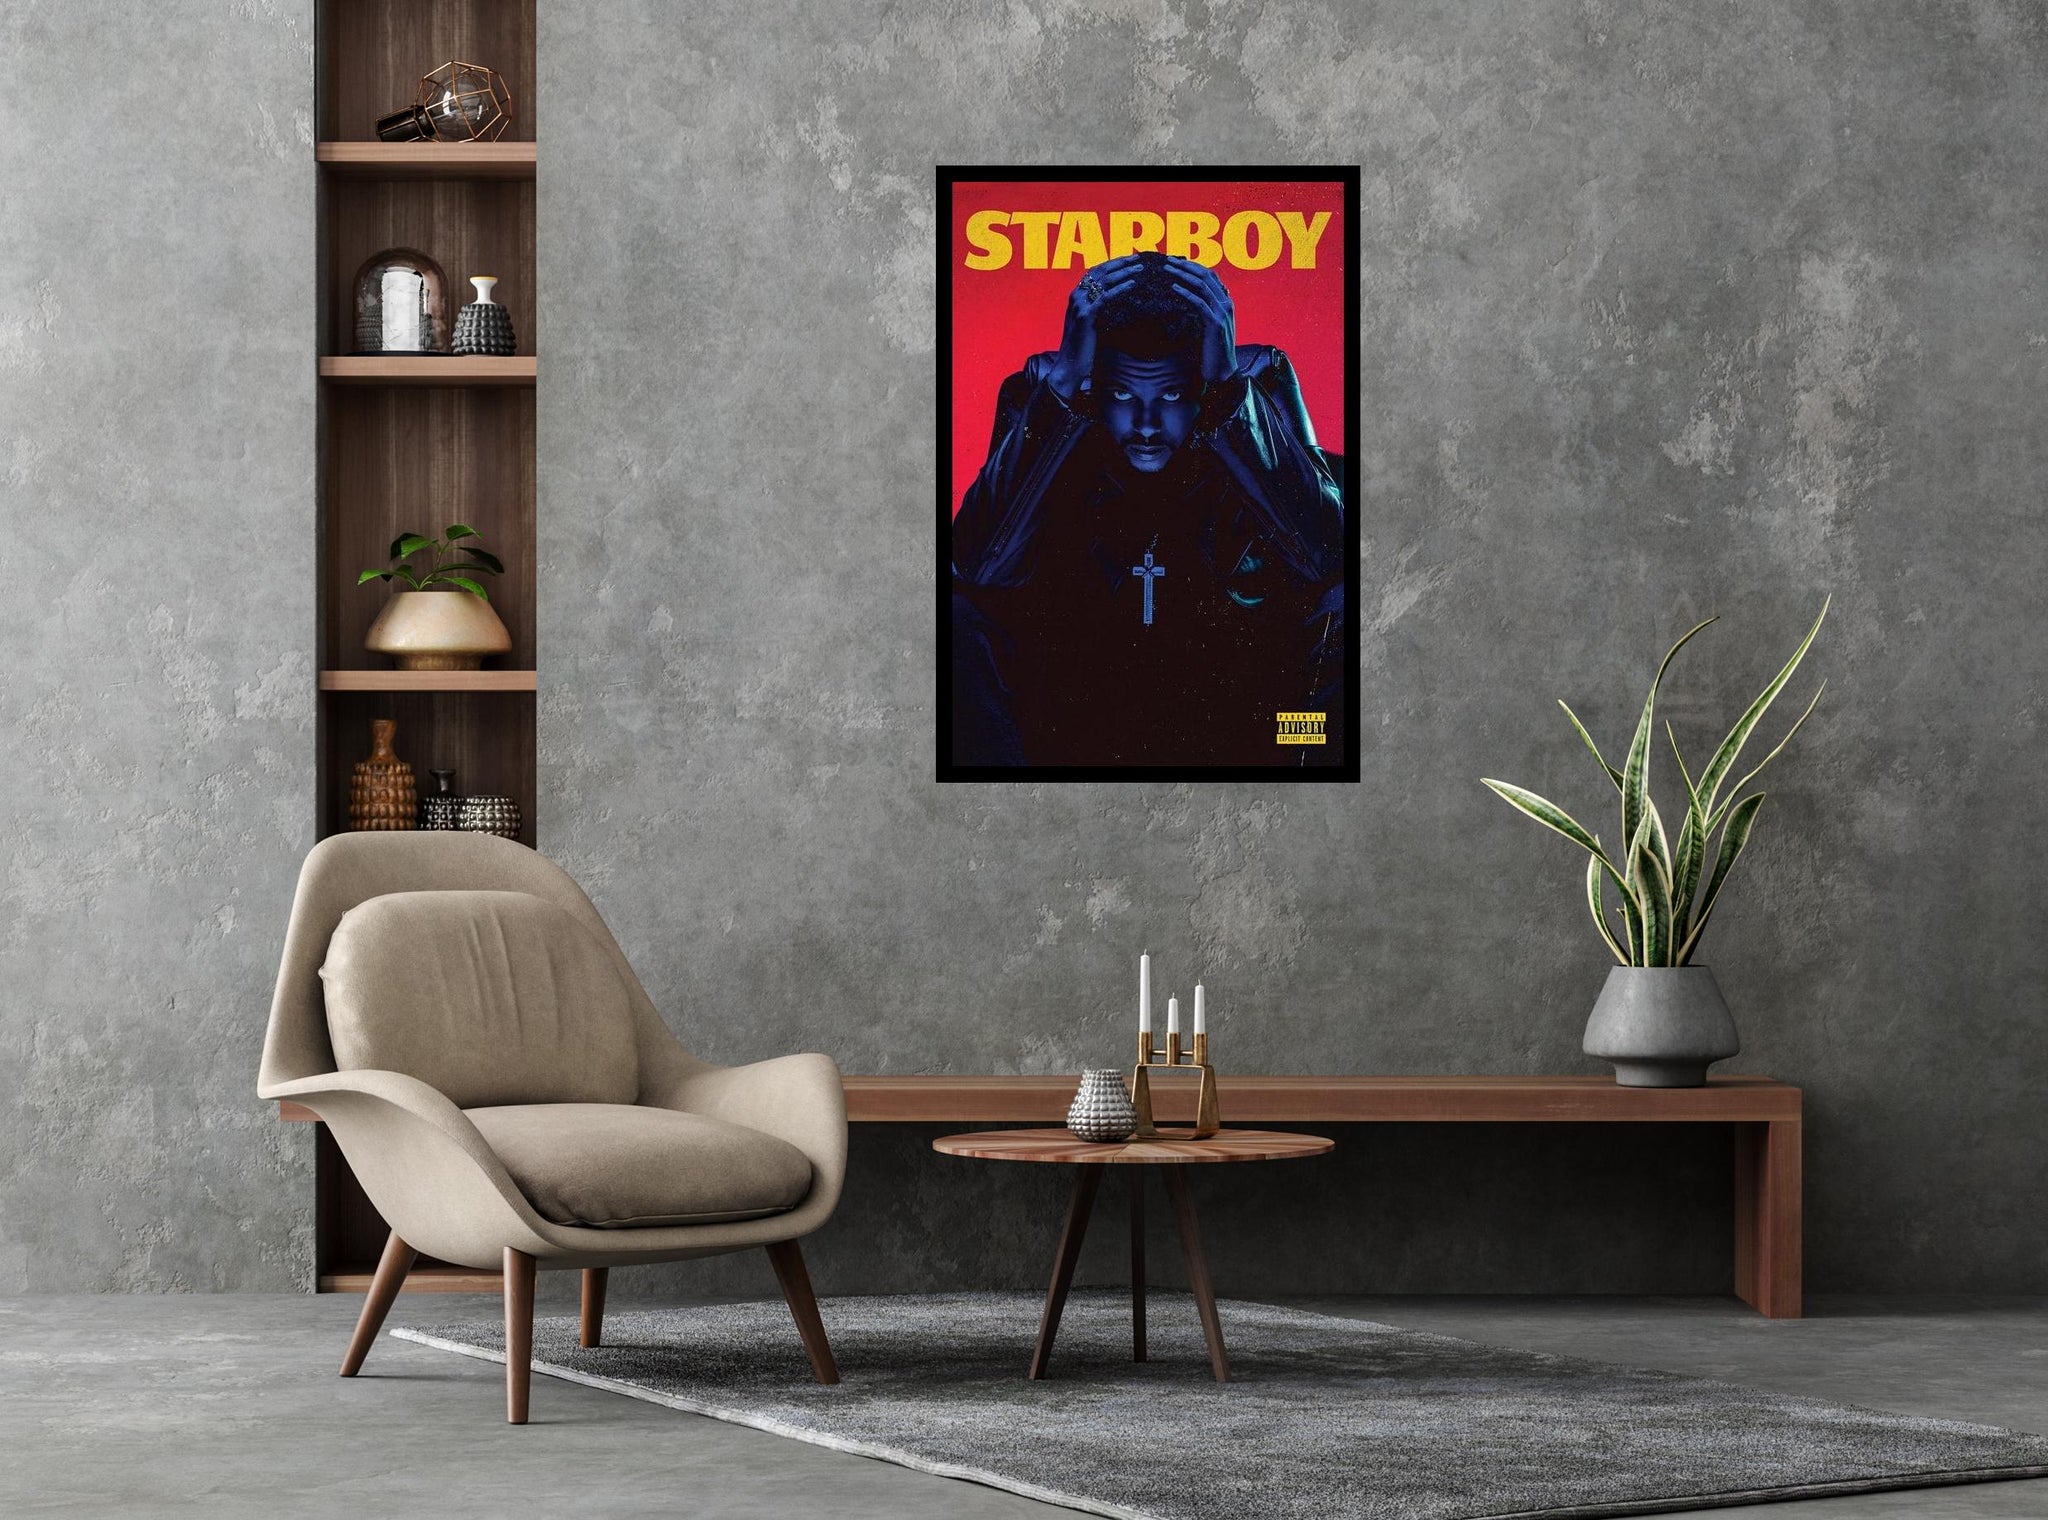 The Weeknd Starboy Poster, the Weeknd Poster, Starboy Poster 